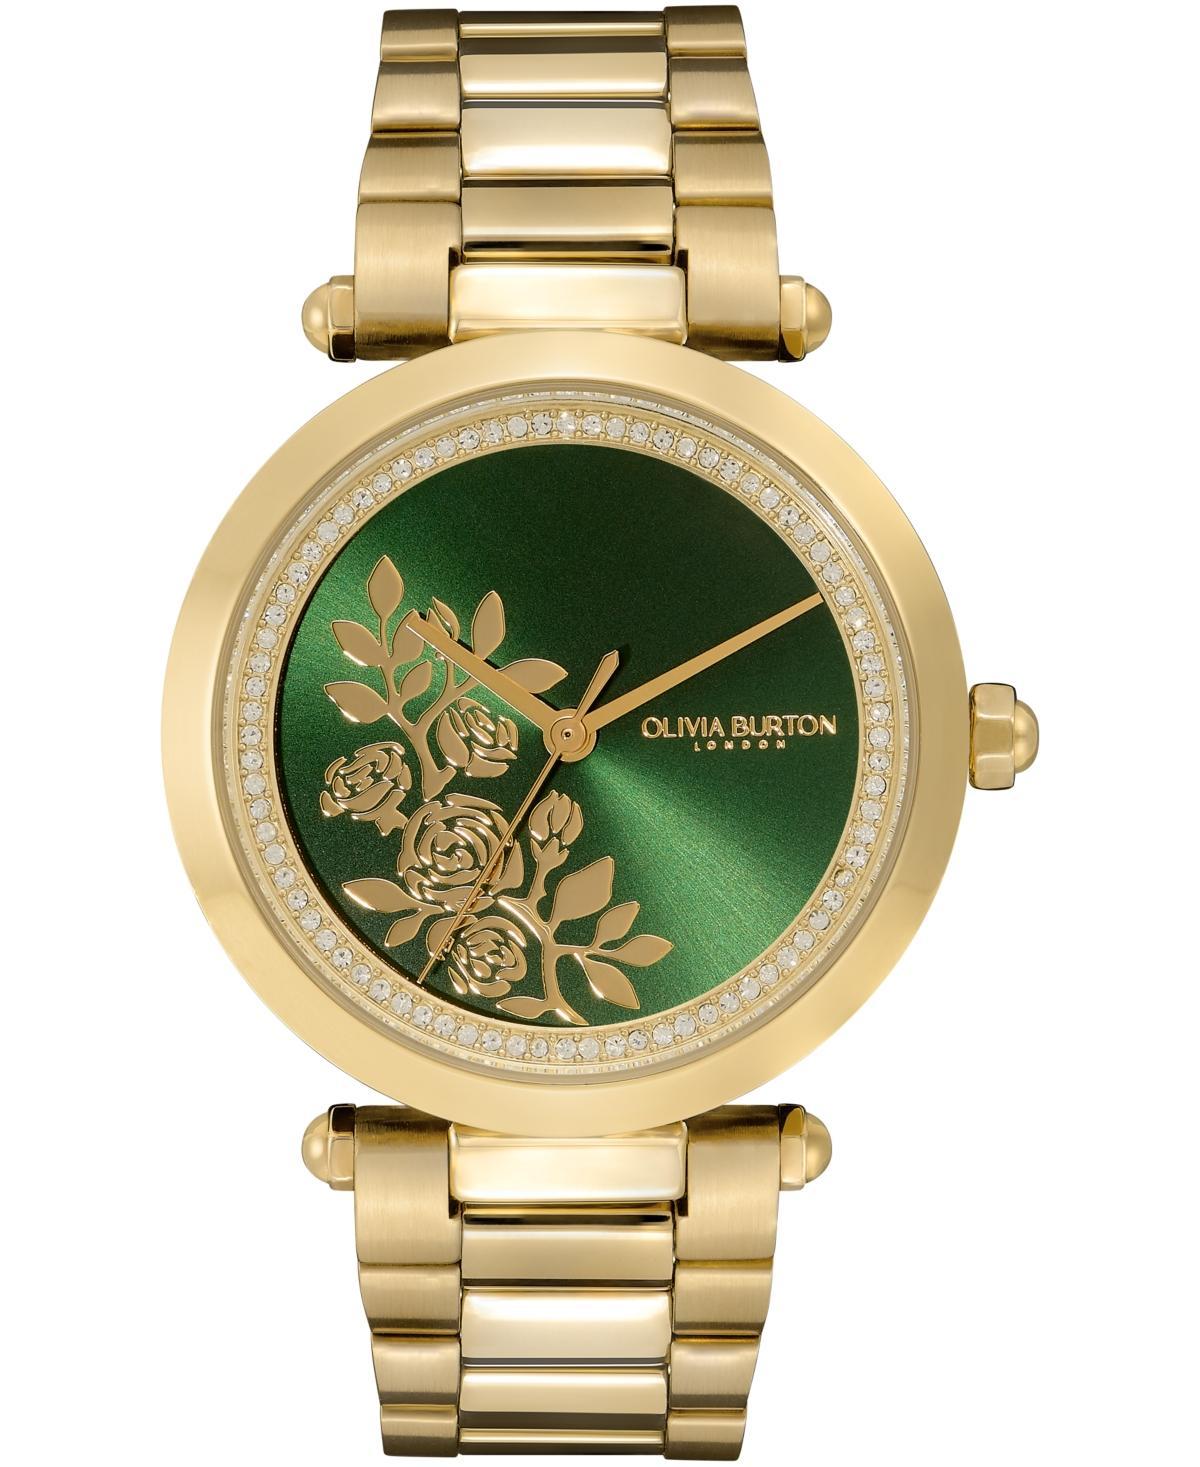 Olivia Burton Signature Florals Leather Strap Watch, 34mm Product Image